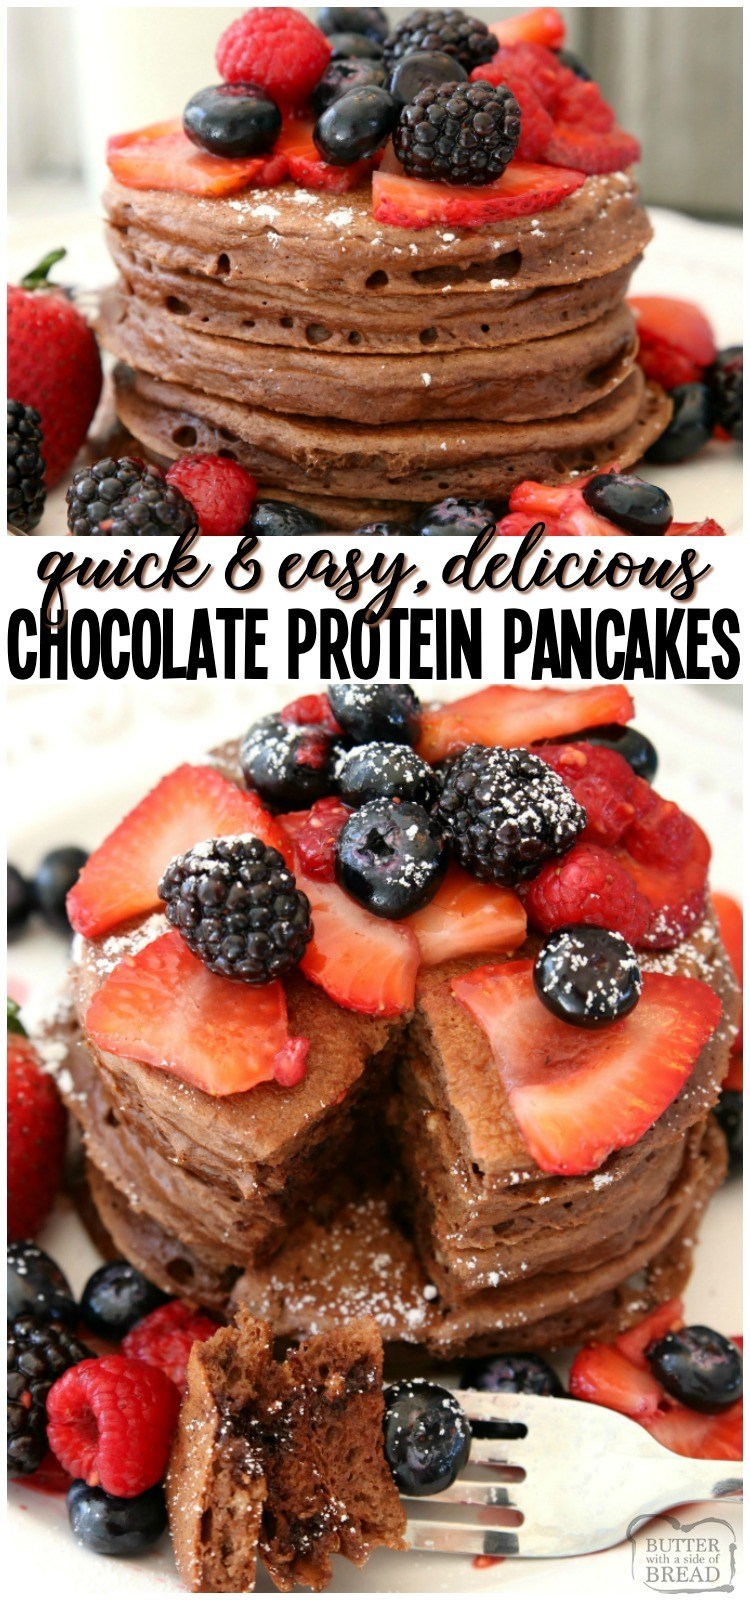 Chocolate Protein Pancakes are sweet protein pancake recipe made with chocolate chips & topped with fresh berries. Perfect for a satisfying breakfast, brunch or dinner! #protein #pancakes #chocolate #breakfast #chocolatechips #pancakemix #recipe from BUTTER WITH A SIDE OF BREAD